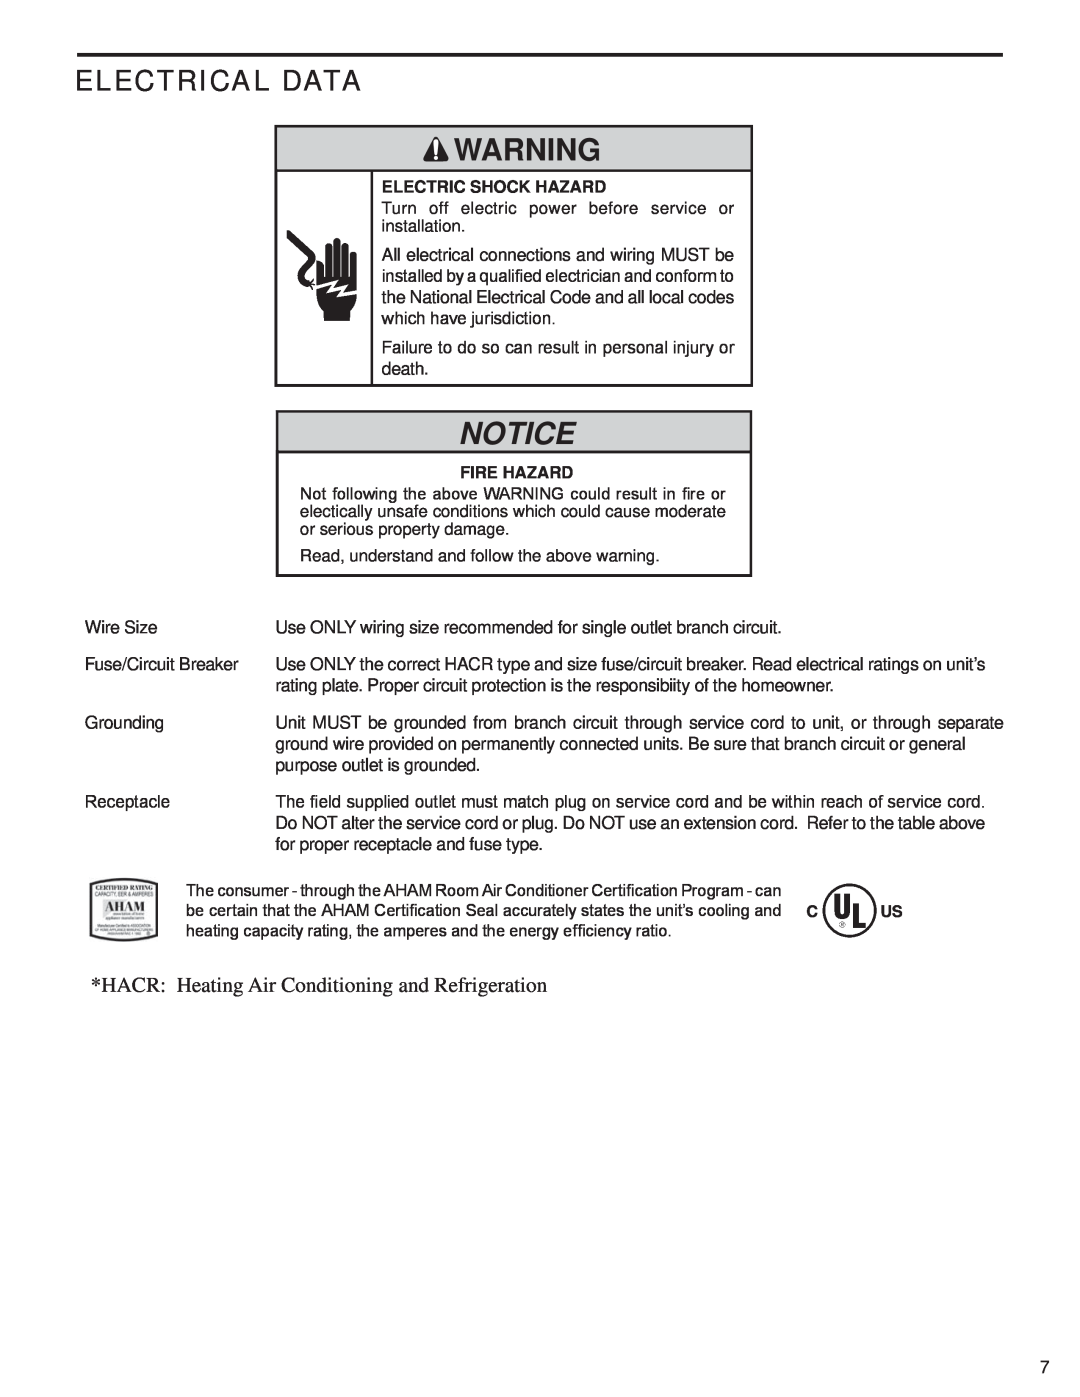 Friedrich SQ06N10 manual Notice, Electrical Data, HACR: Heating Air Conditioning and Refrigeration, Electric Shock Hazard 